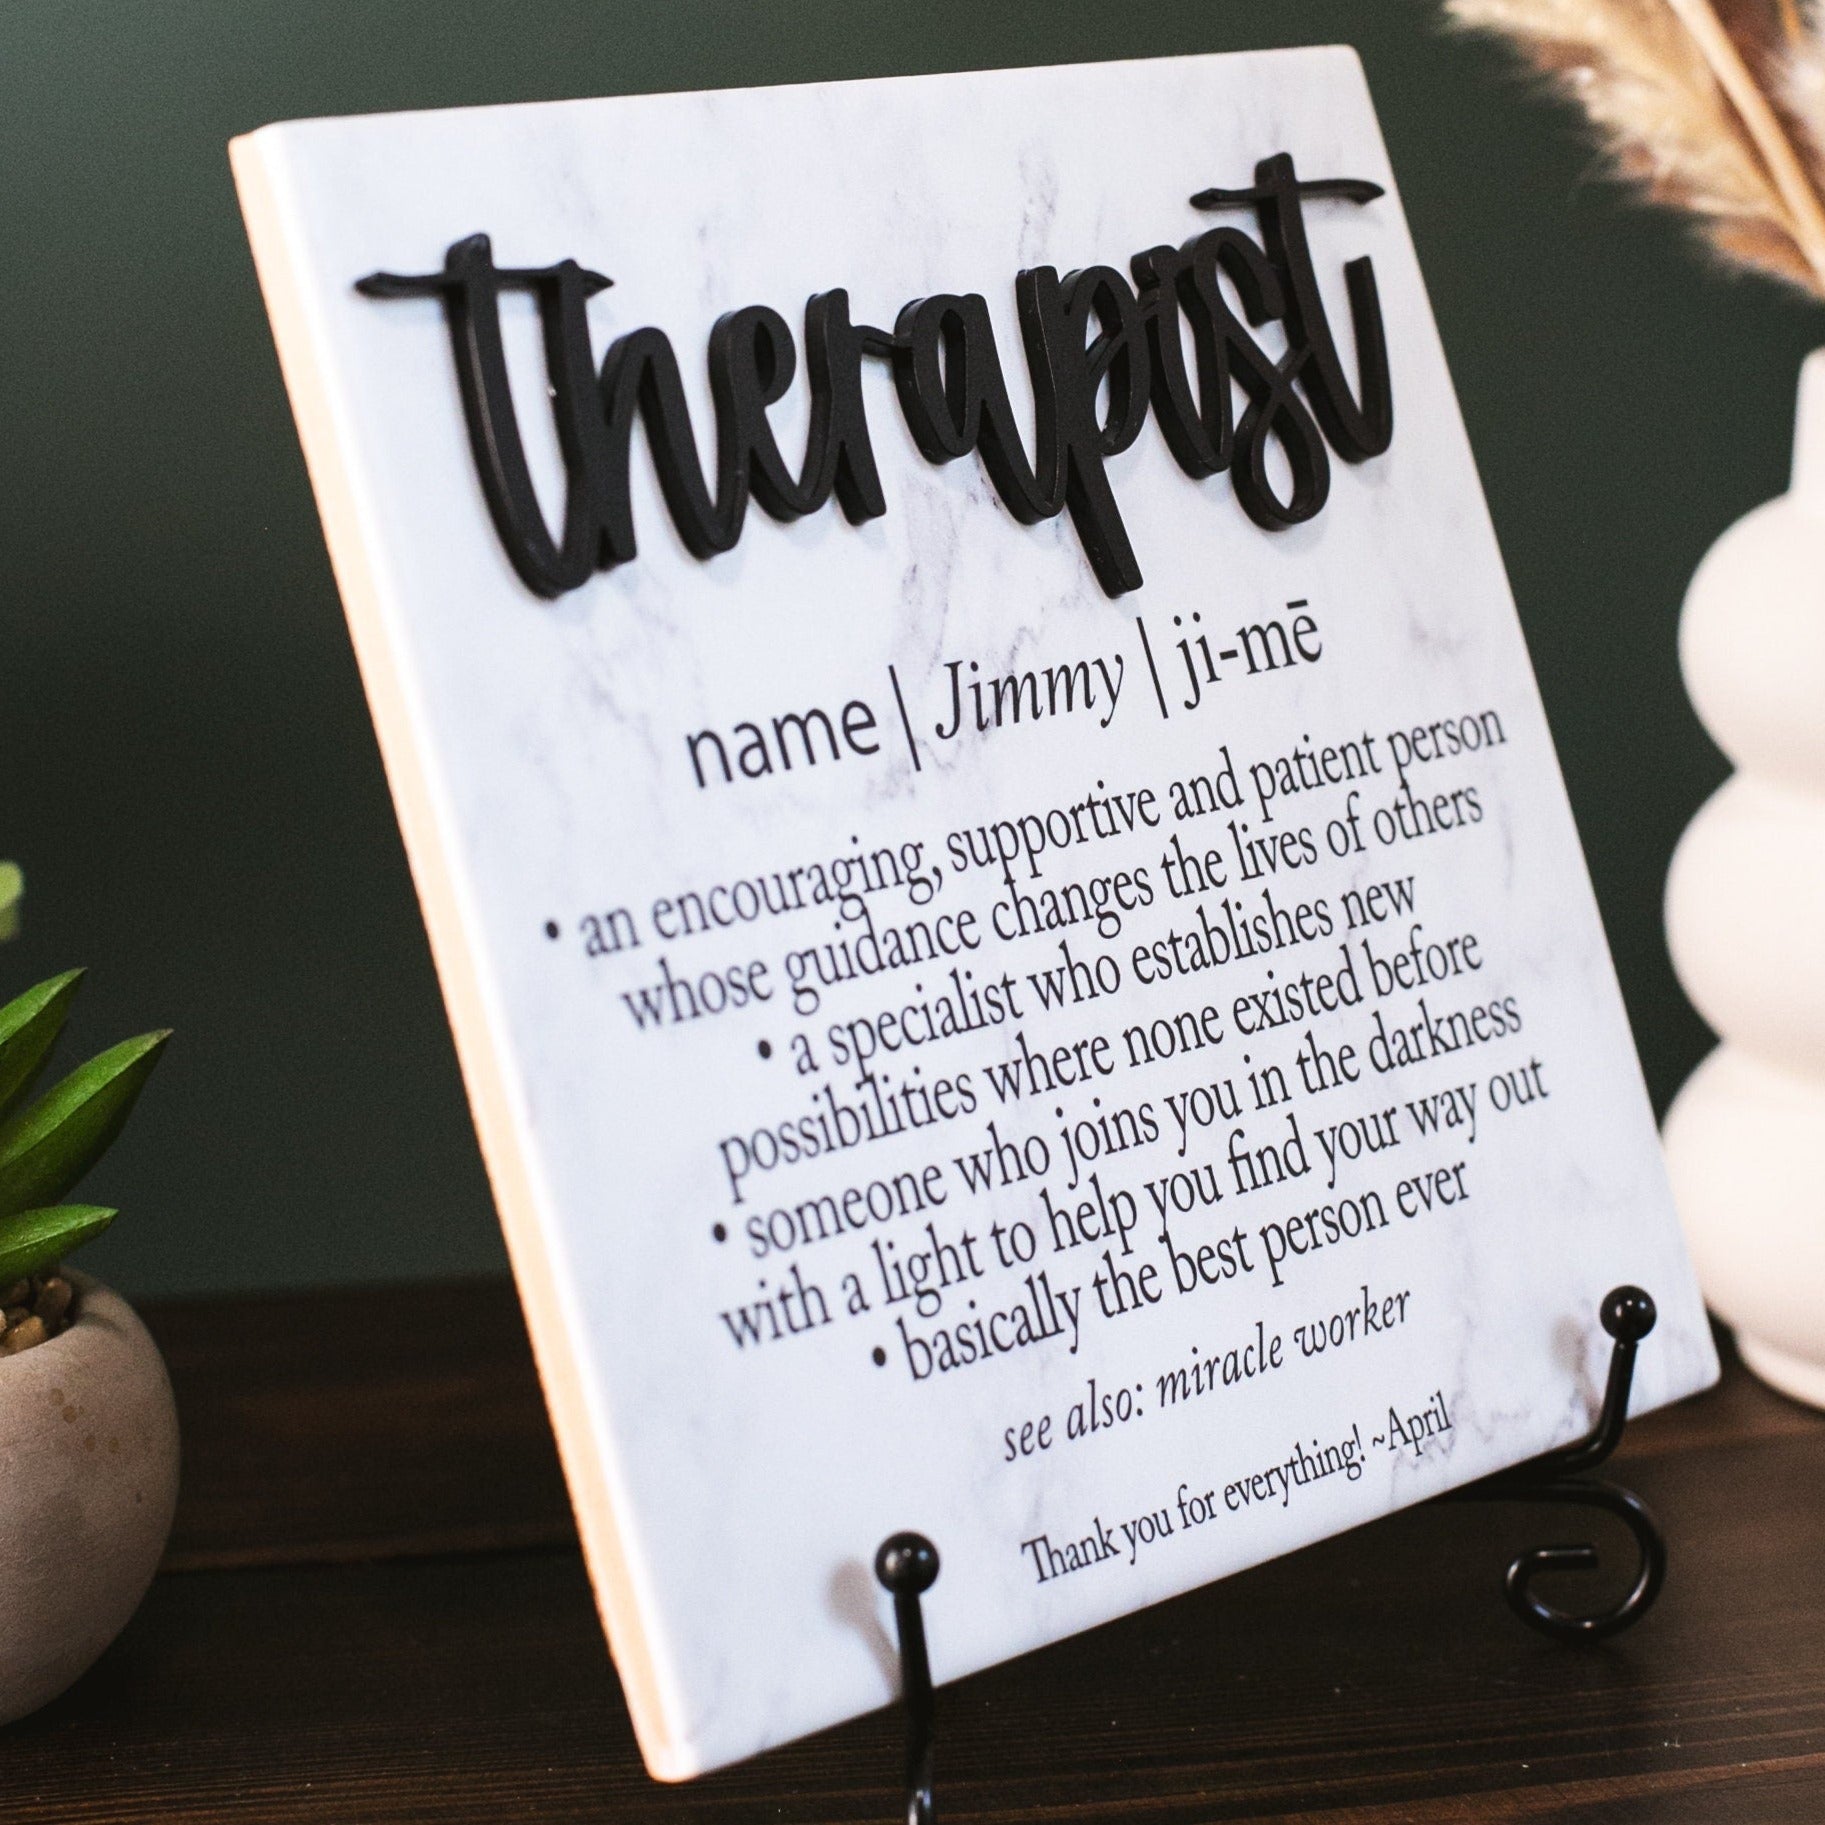 3D Therapist Ceramic Tile Plaque With Stand, Thank You Mentor Sign, Custom Boss Retirement Appreciation, Teacher, Counselor, Coach, Adviser